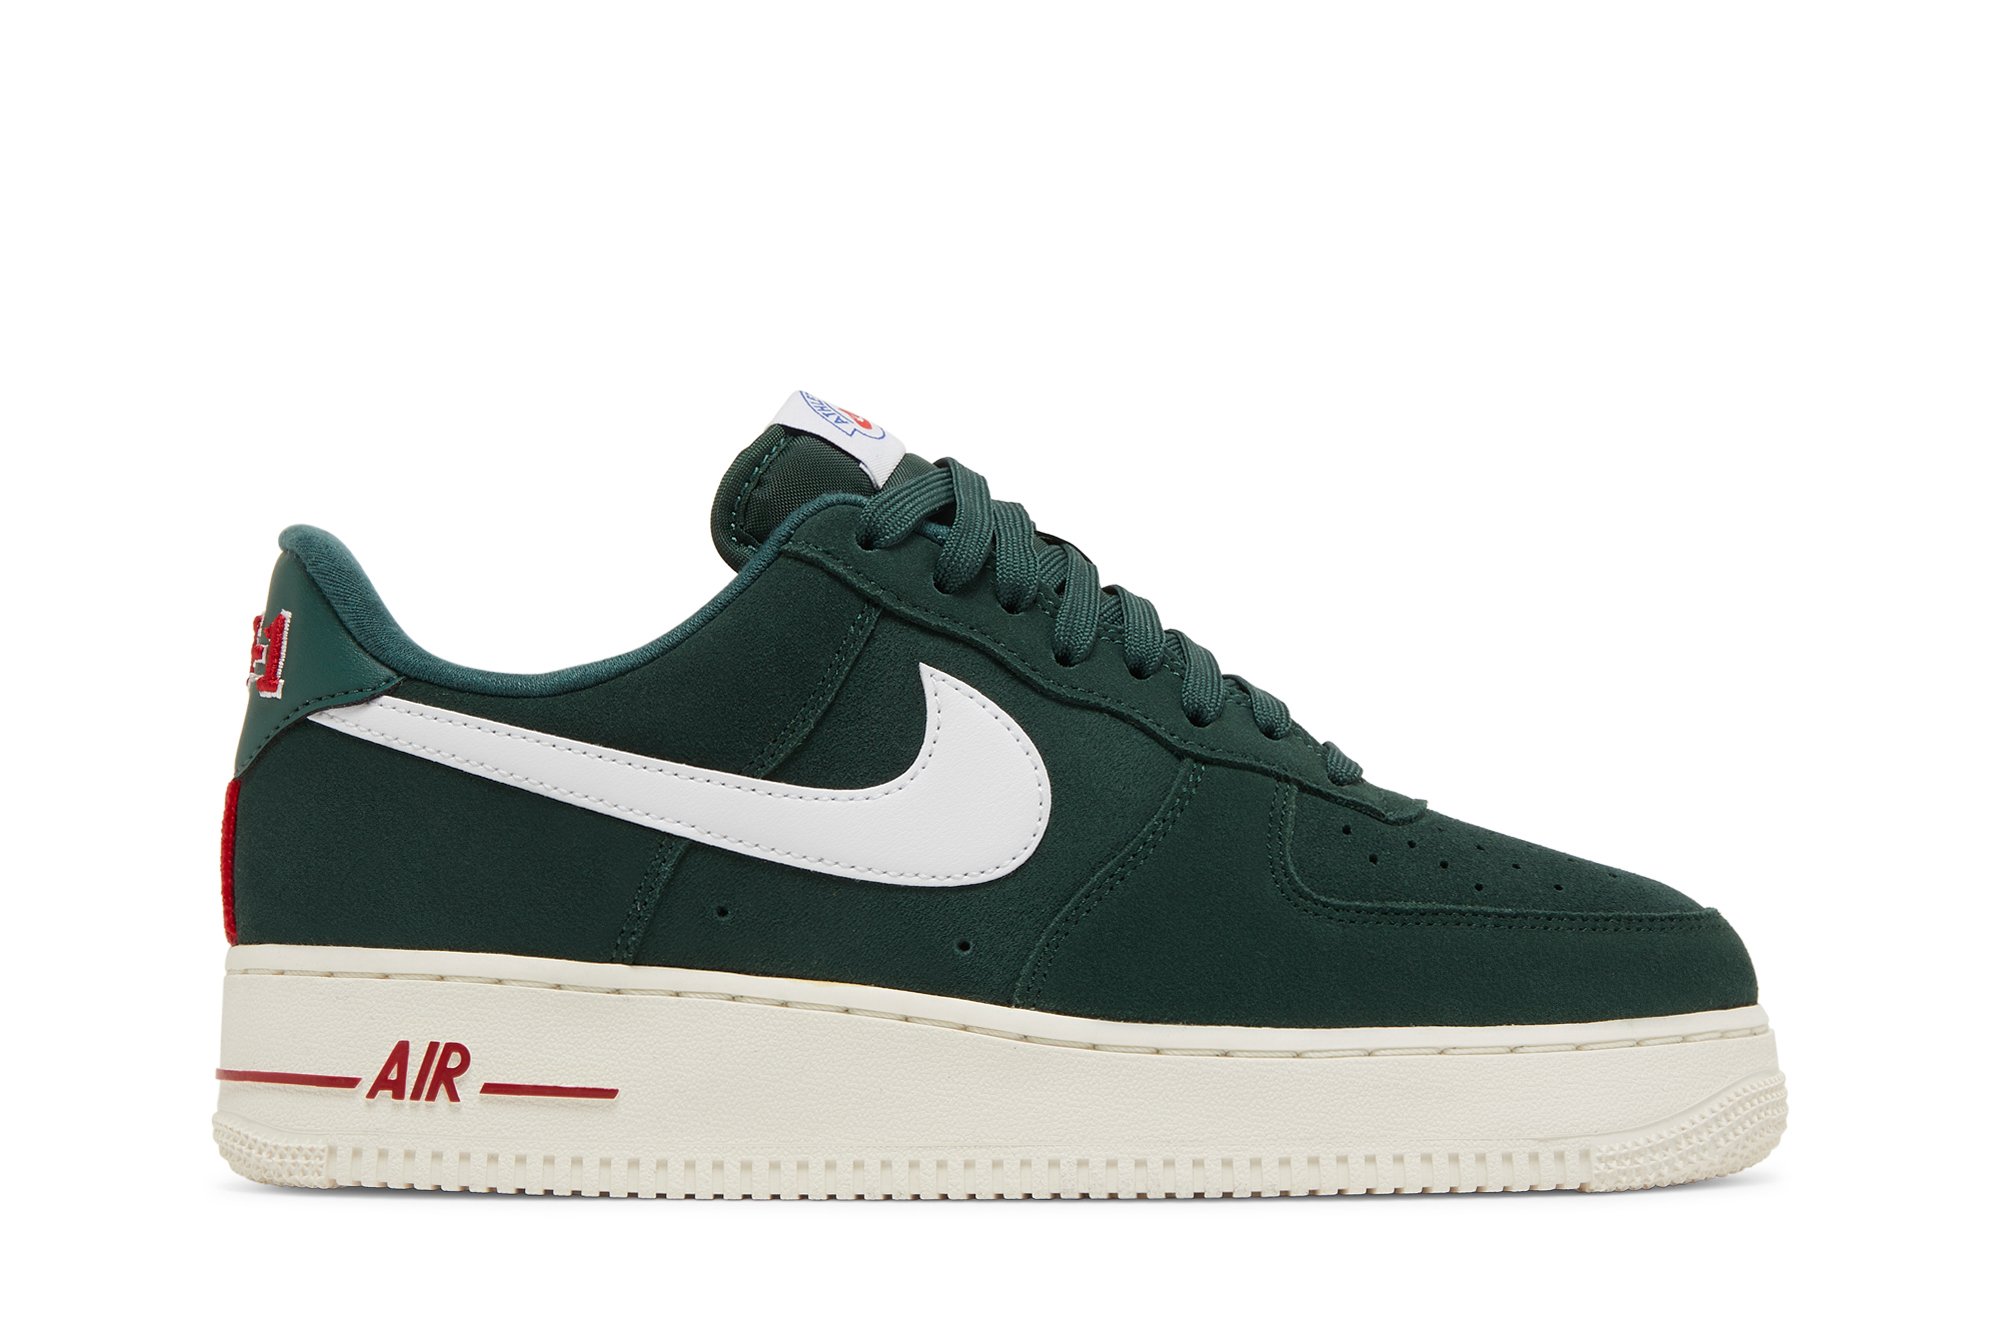 Buy Air Force 1 Low 'Athletic Club' - DH7435 300 | GOAT